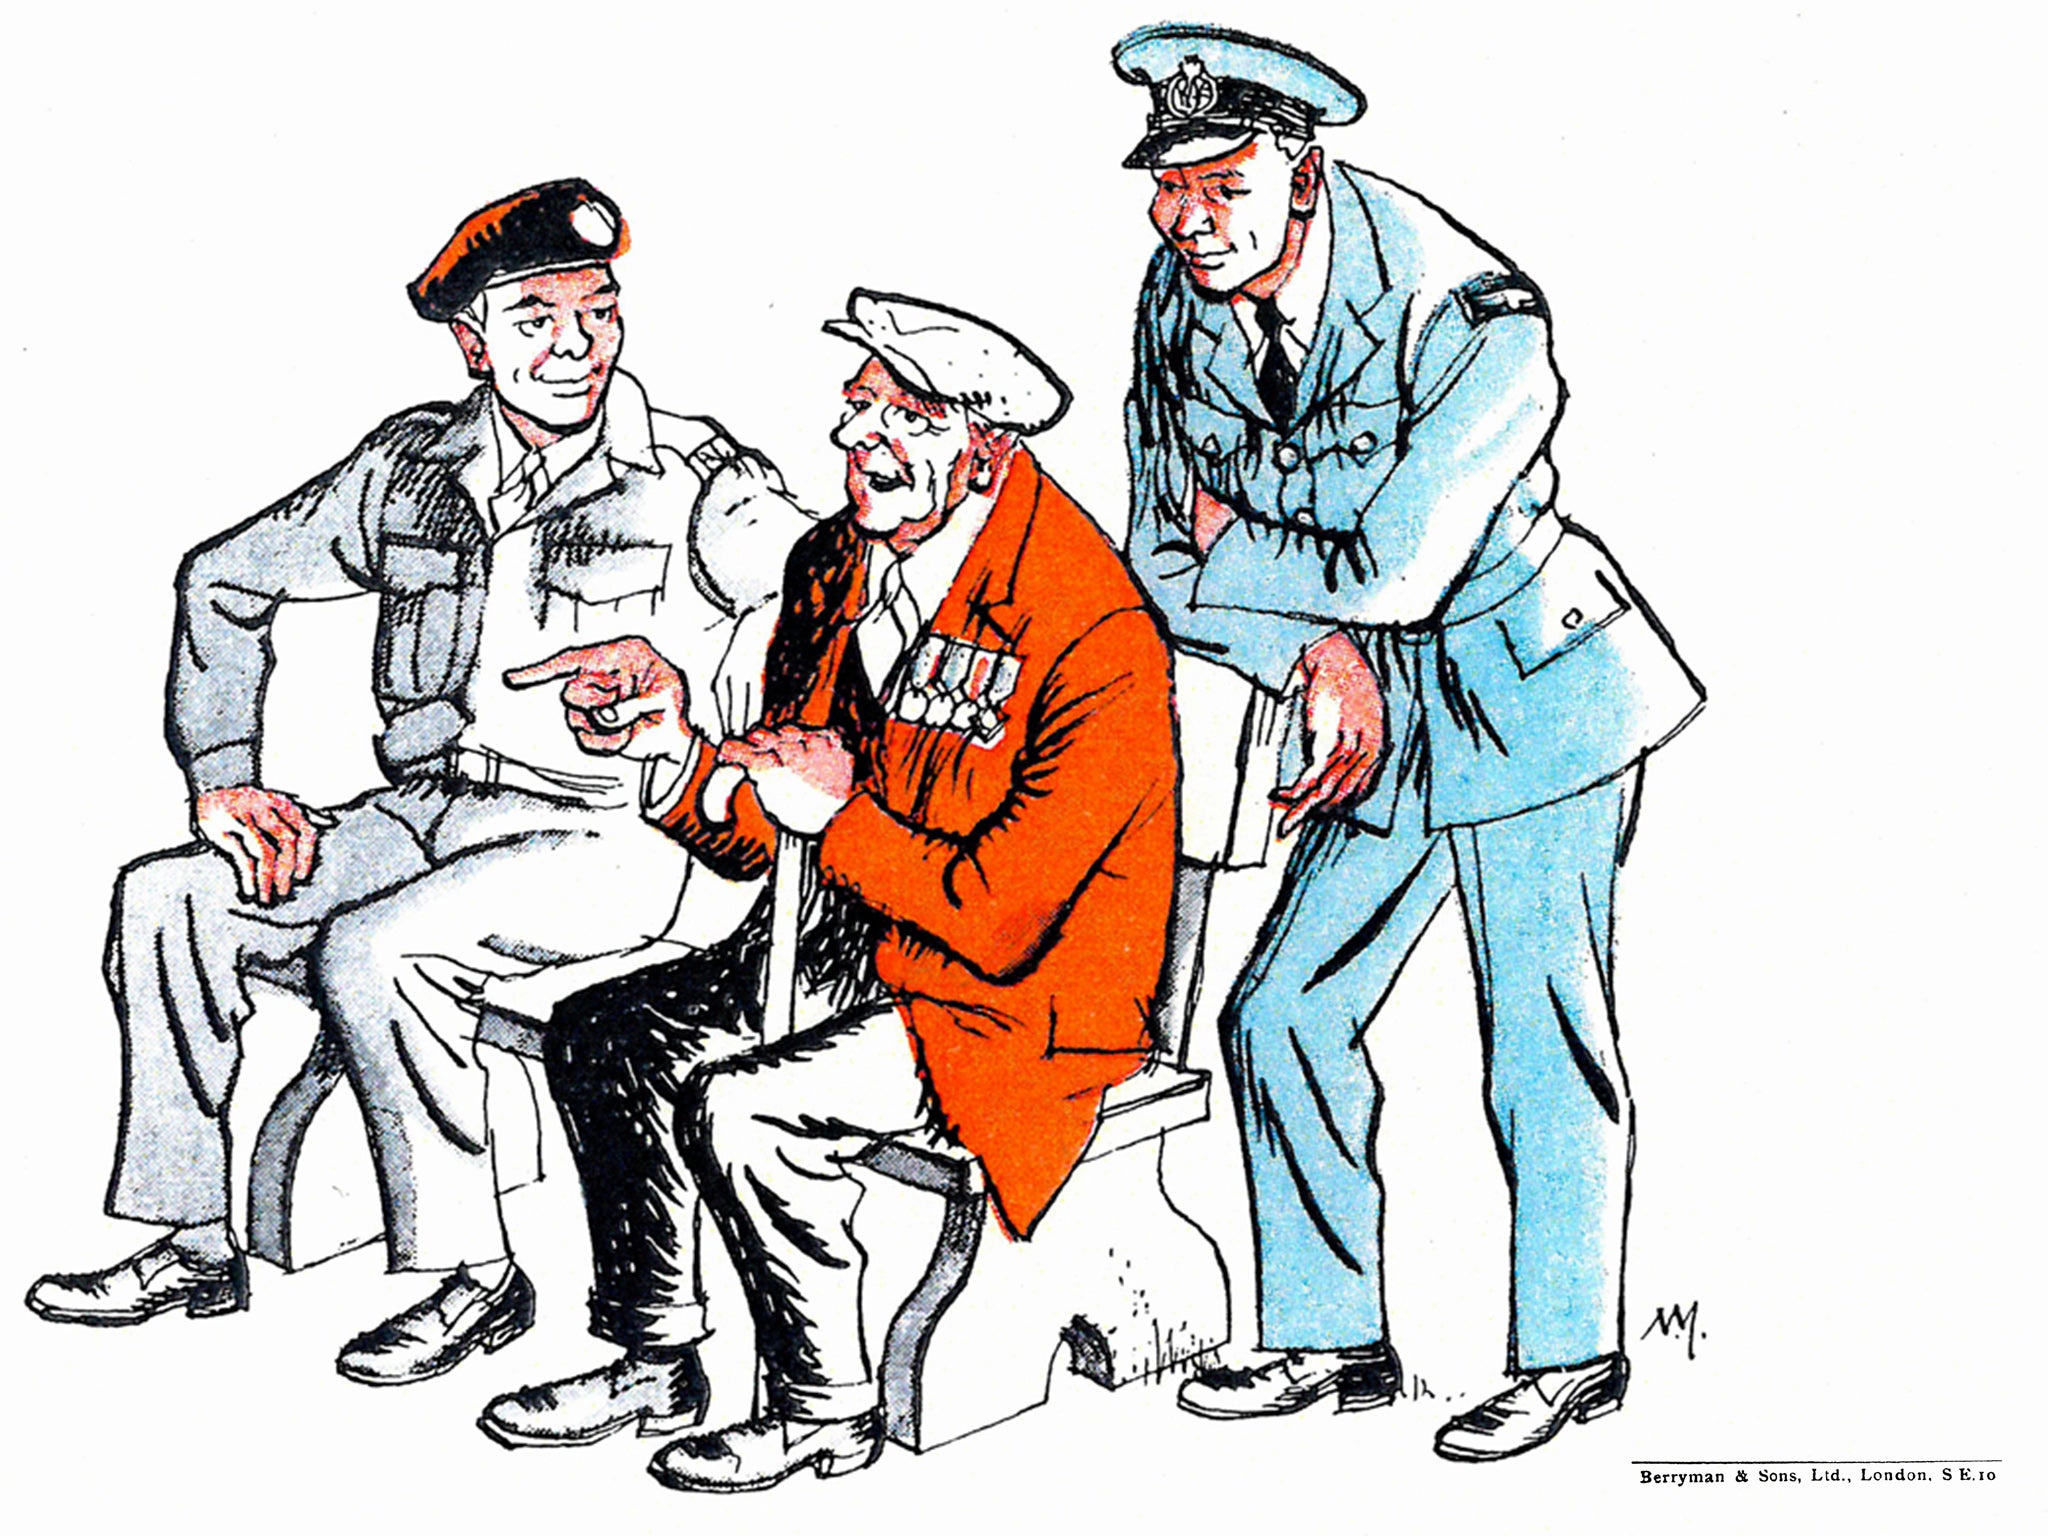 The cartoon is from an original drawn by Norman Mansbridge for the Ex-Services Fellowship Centre (later to become known as Veterans Aid). Mansbridge, who served as a wireless operator in the Merchant Navy, also had a roving commission as a war artist befo